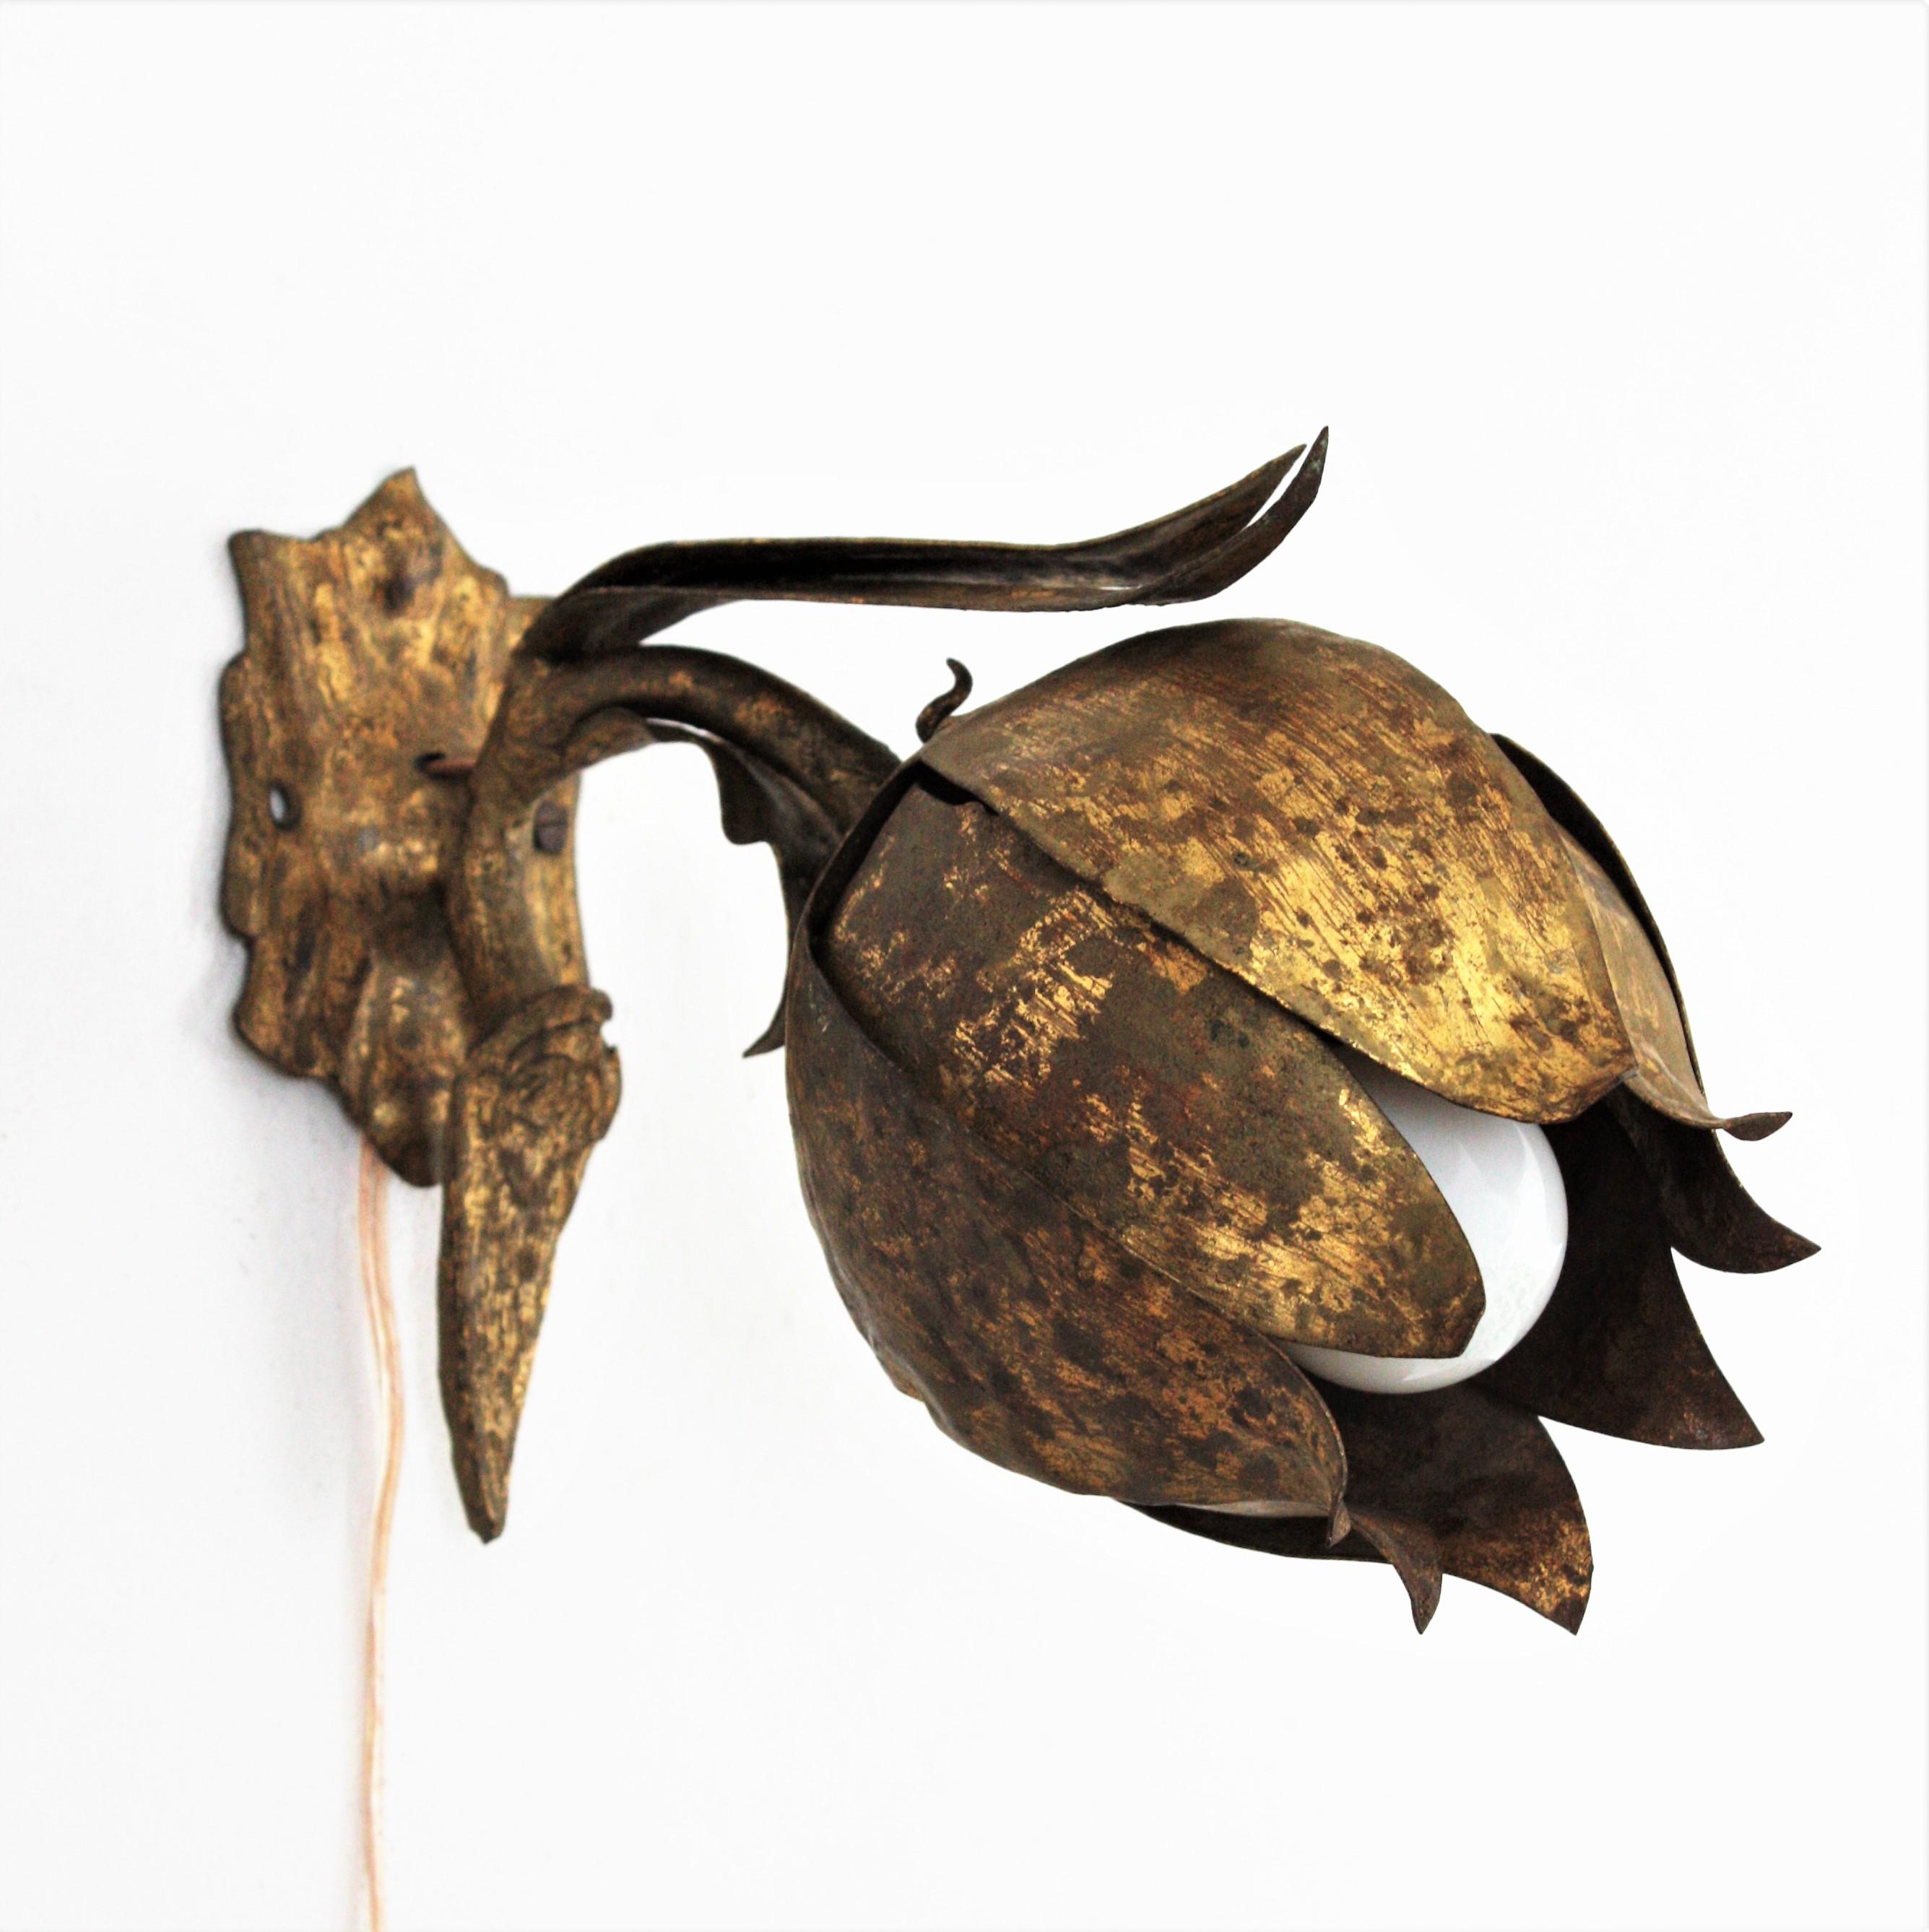 Flower Bud Wall Light, Gold Leaf, Gilt Iron. France, 1940s-1950s
This handwrought iron wall light features a flower bud with leaves. It has a terrific aged patina showing its original gold leaf gilding.
This floral wall sconce will be an elegant